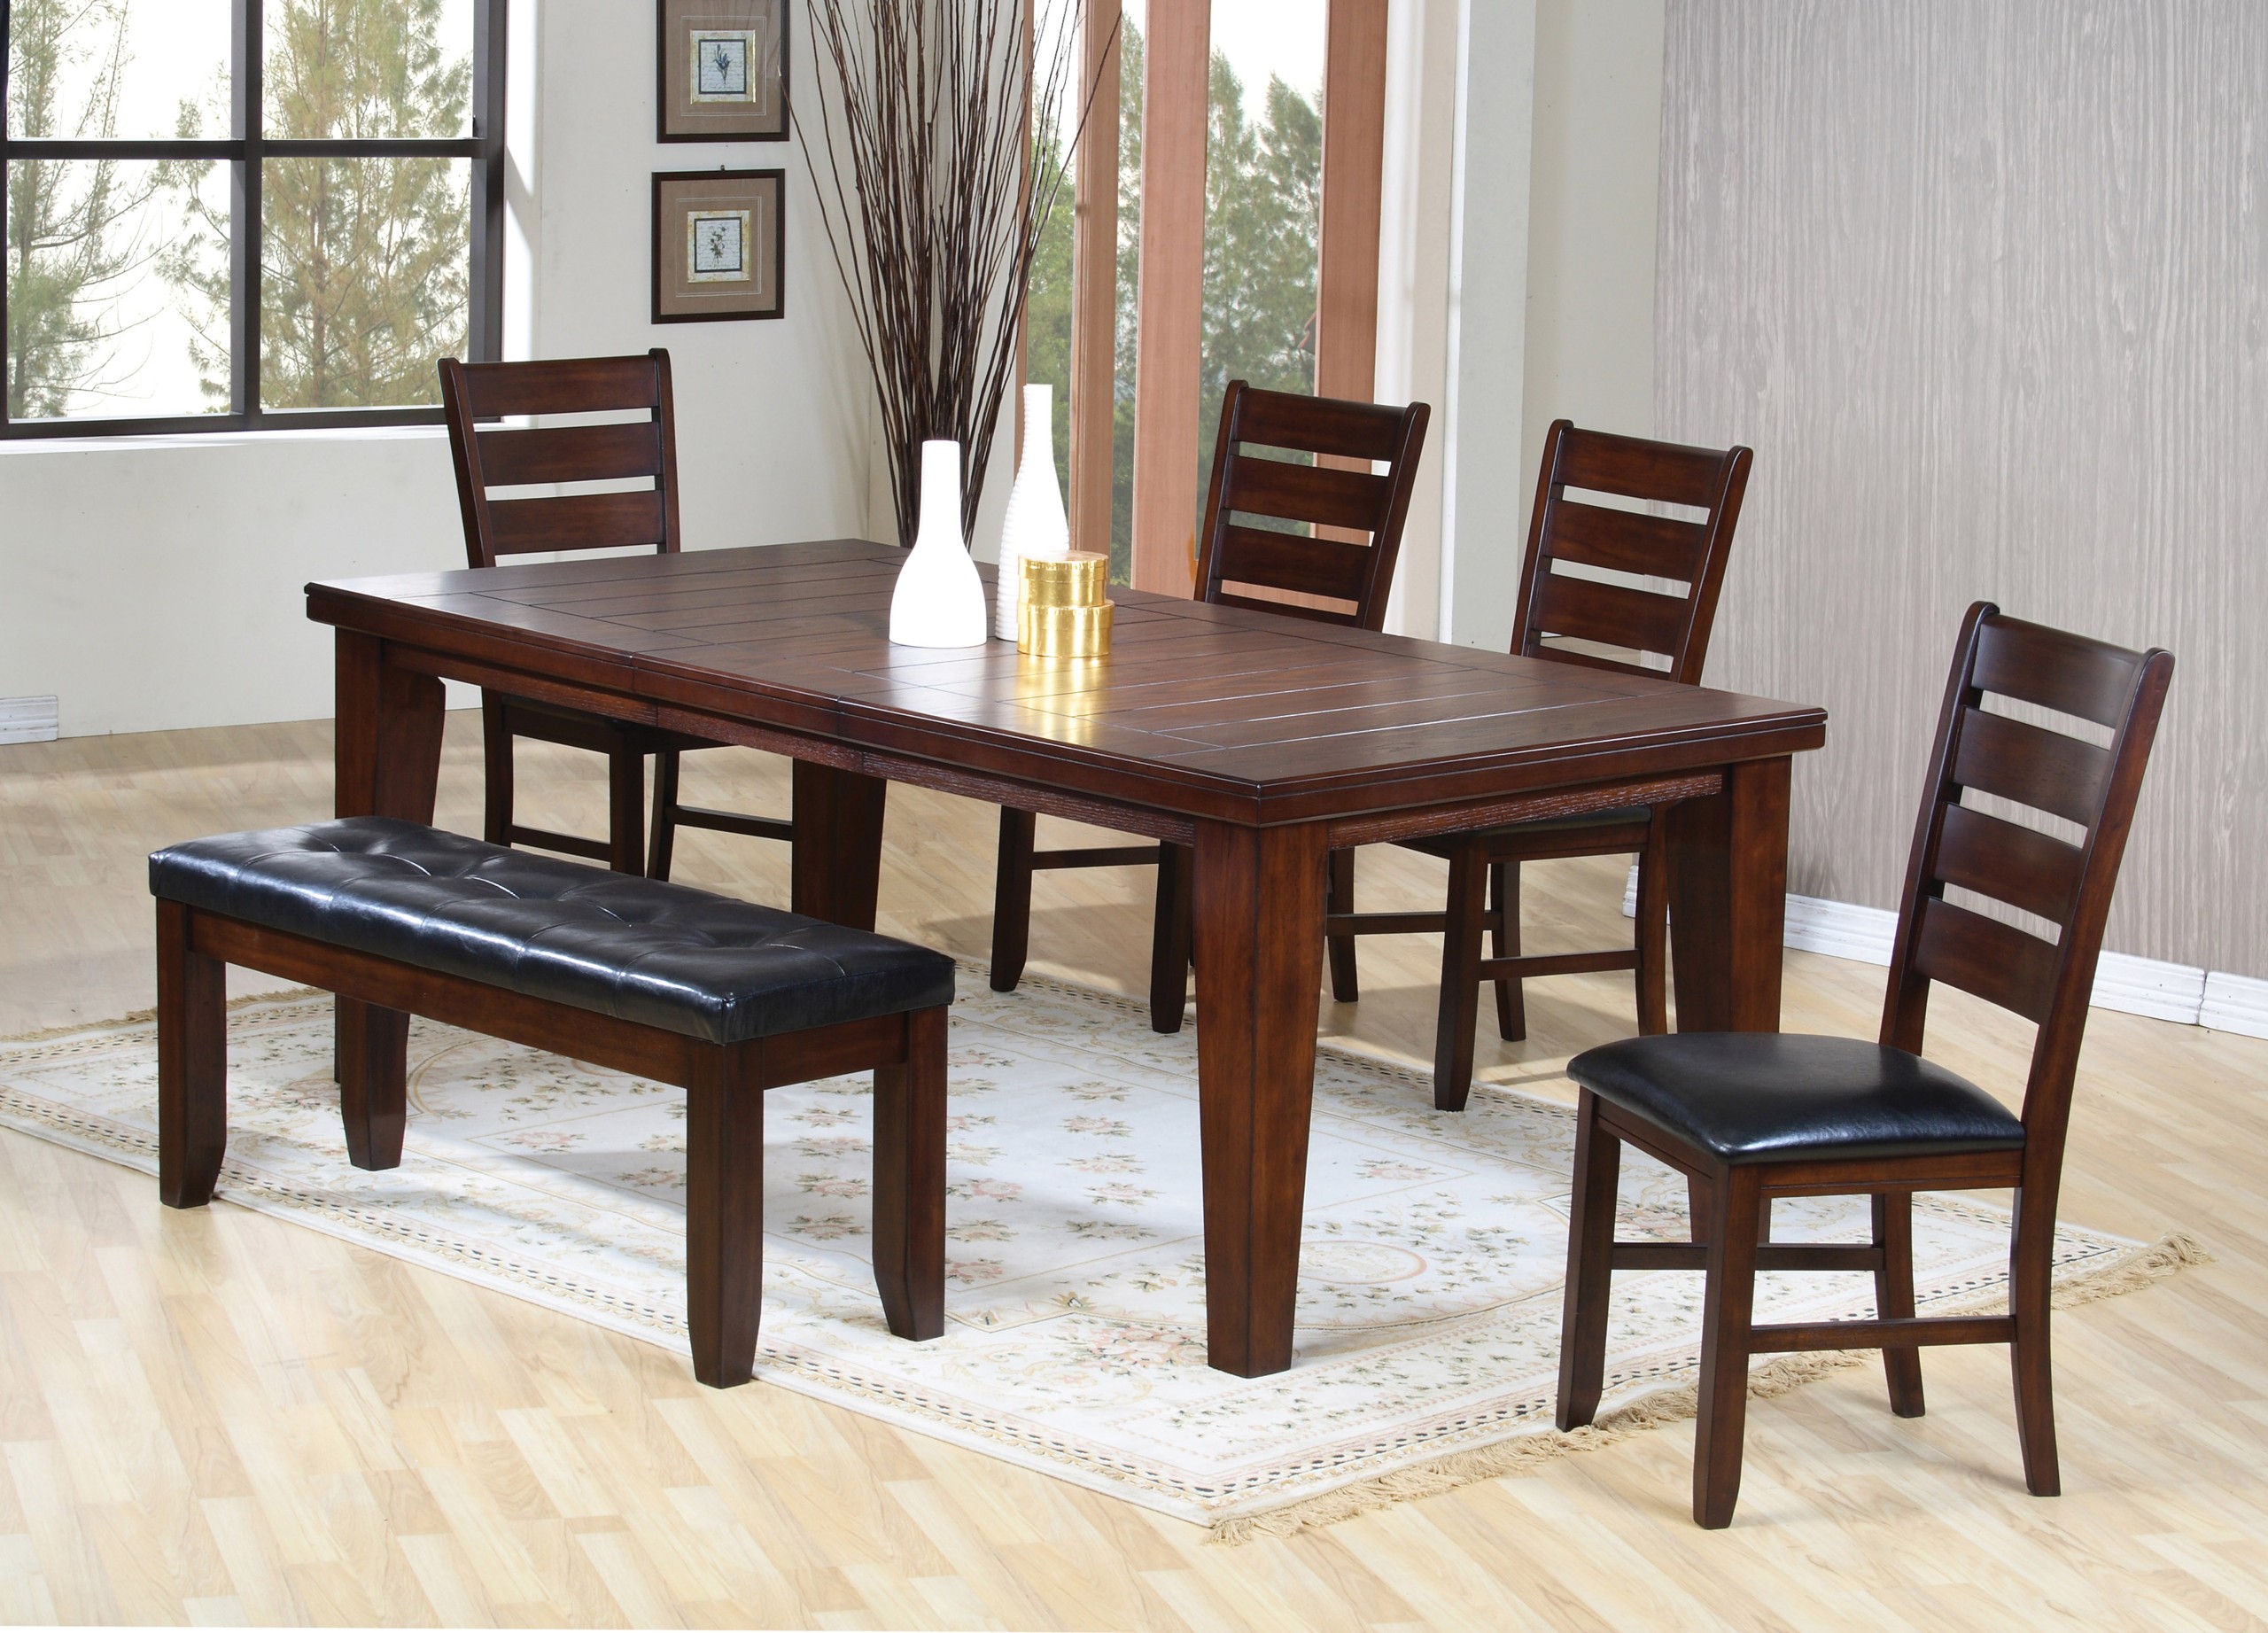 6pc Dining Table & Chairs Set with Ladder Back Dark Oak Finish